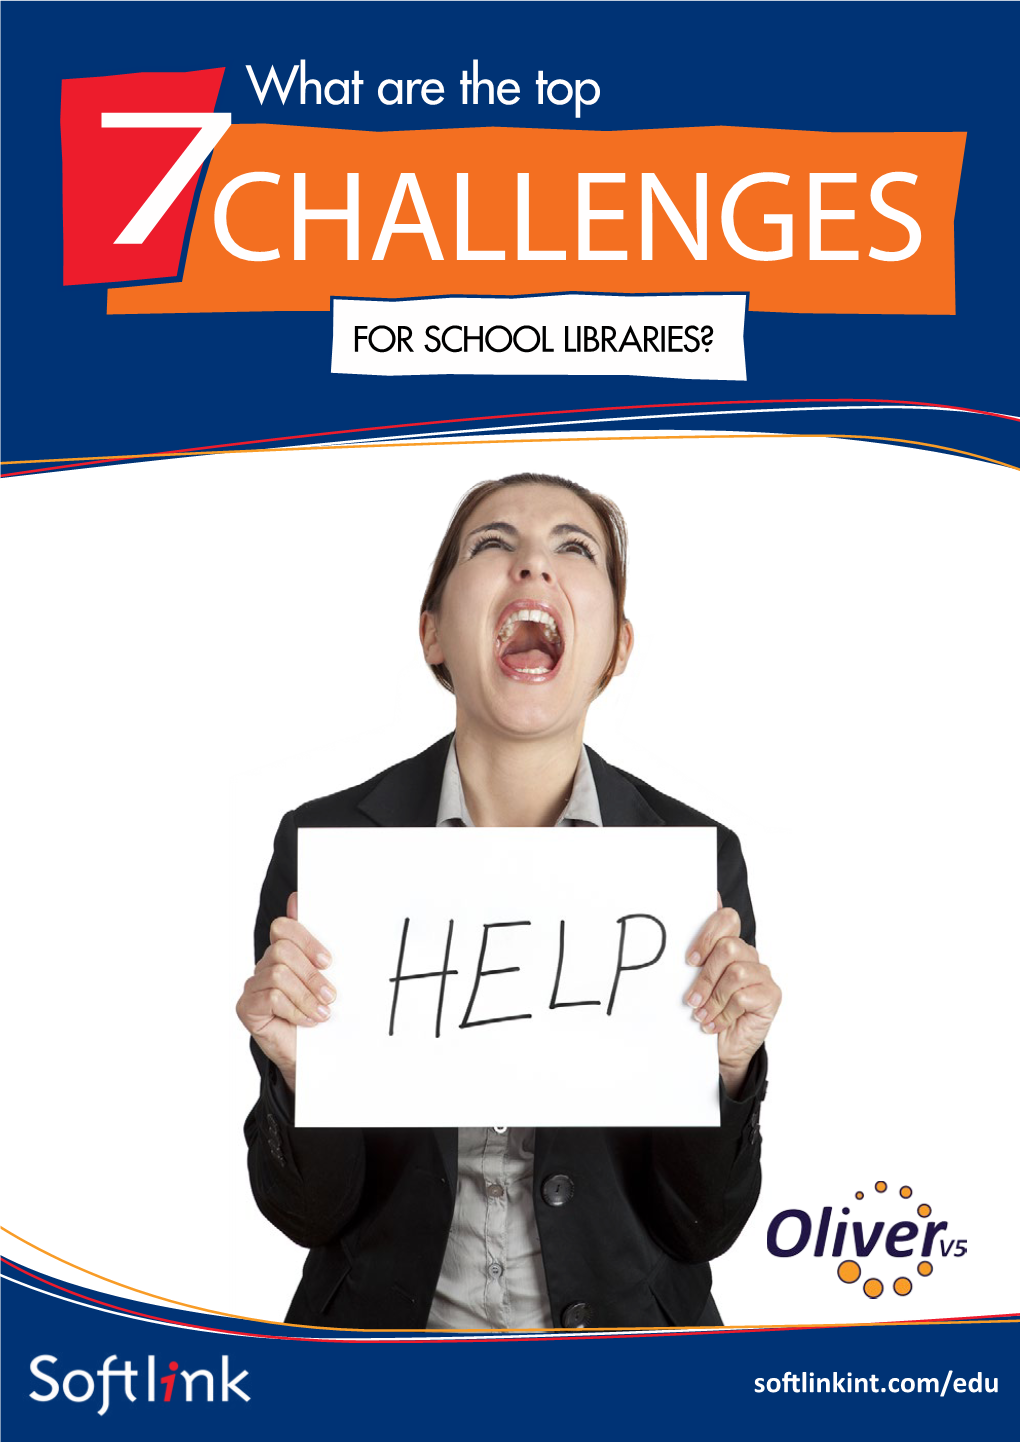 What Are the Top 7 Challenges for School Libraries